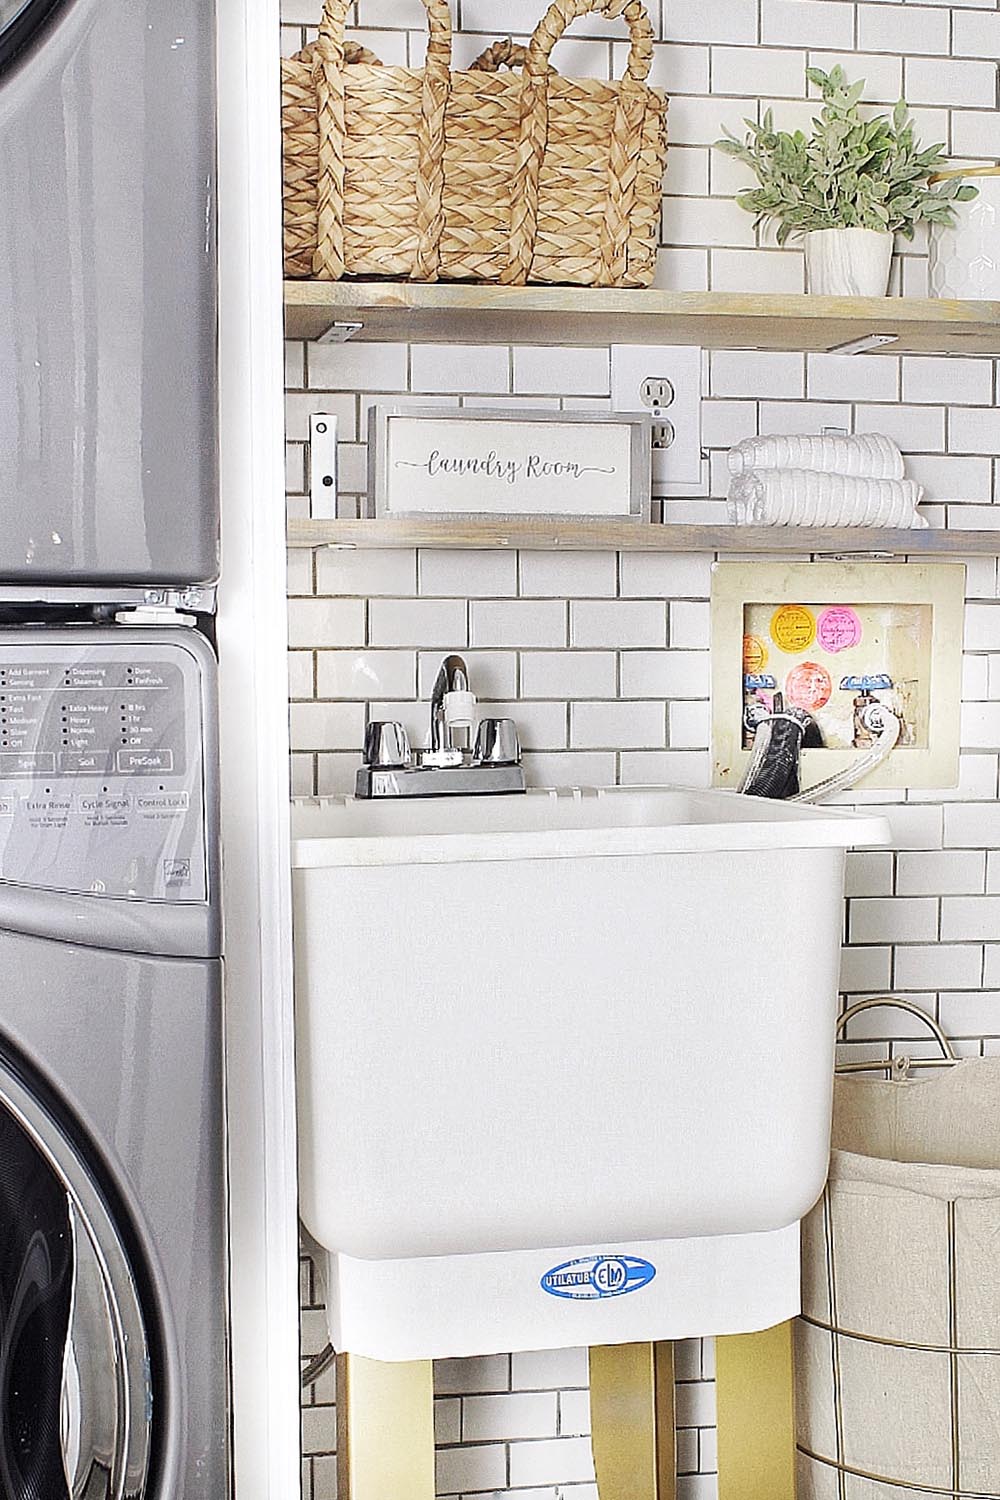 A small laundry room sink with gold painted legs sits in front of a white tile wall.